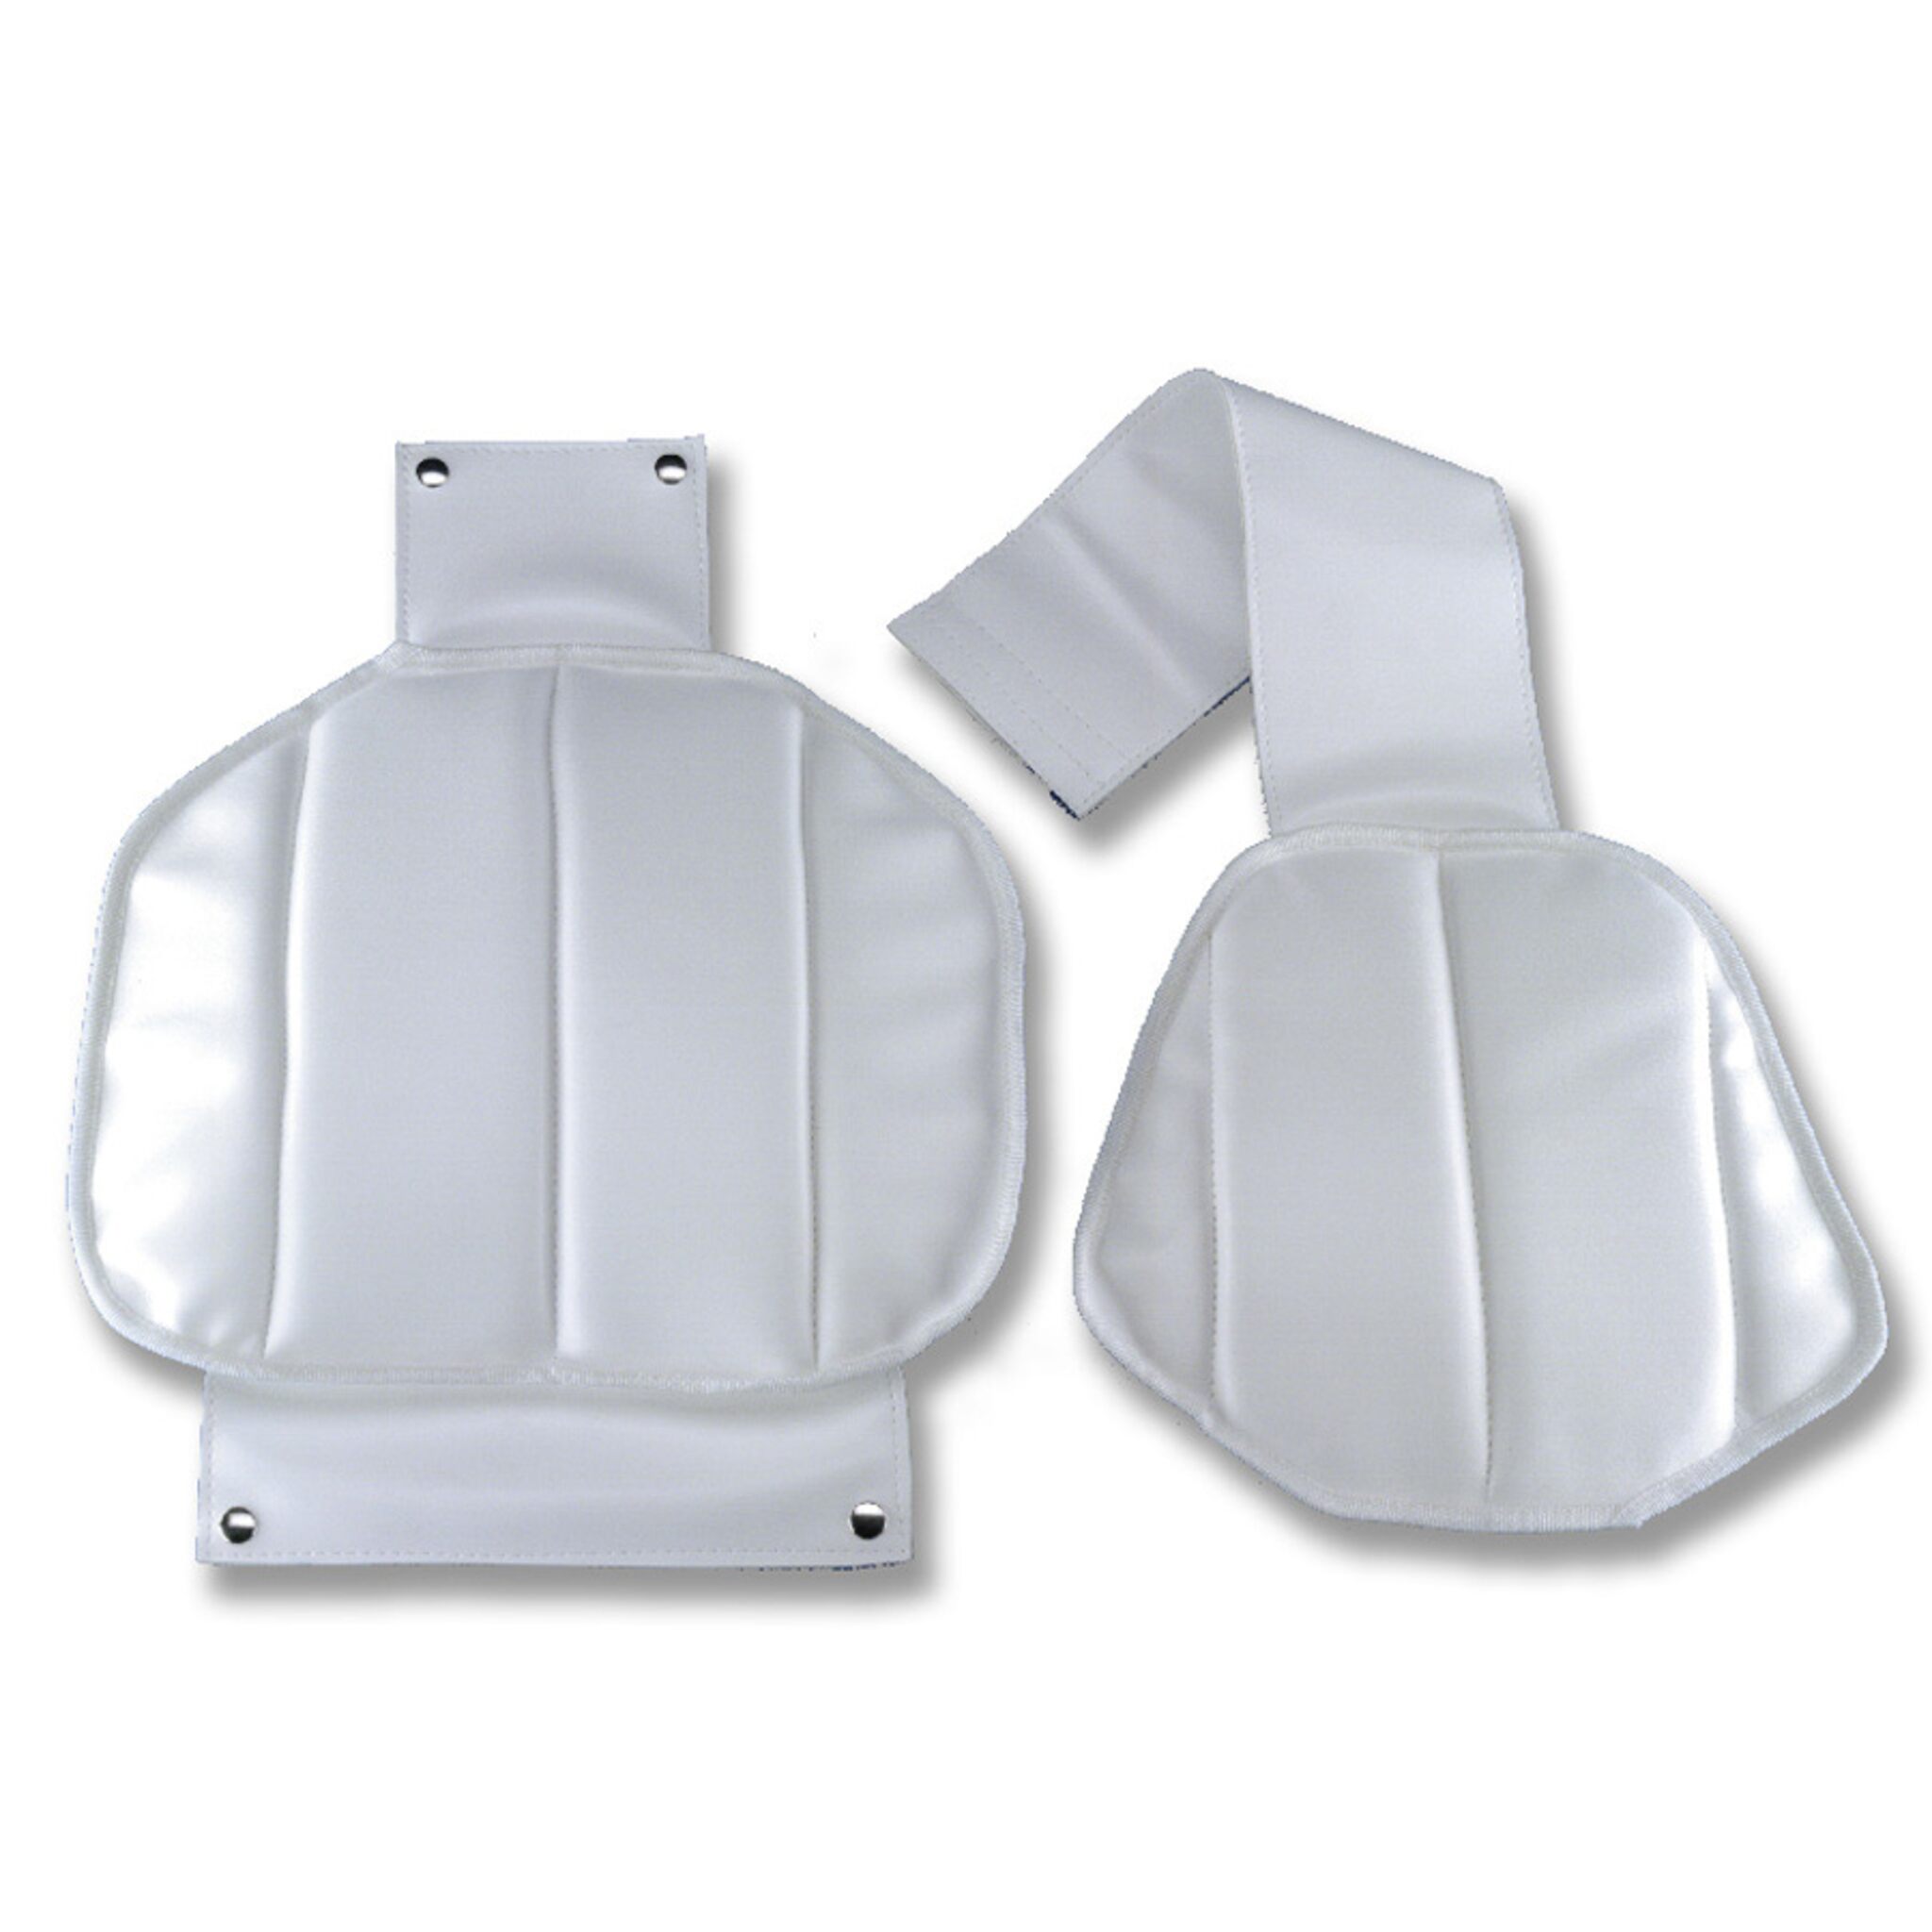 Seat cushion for steering seat ADMIRAL PLUS